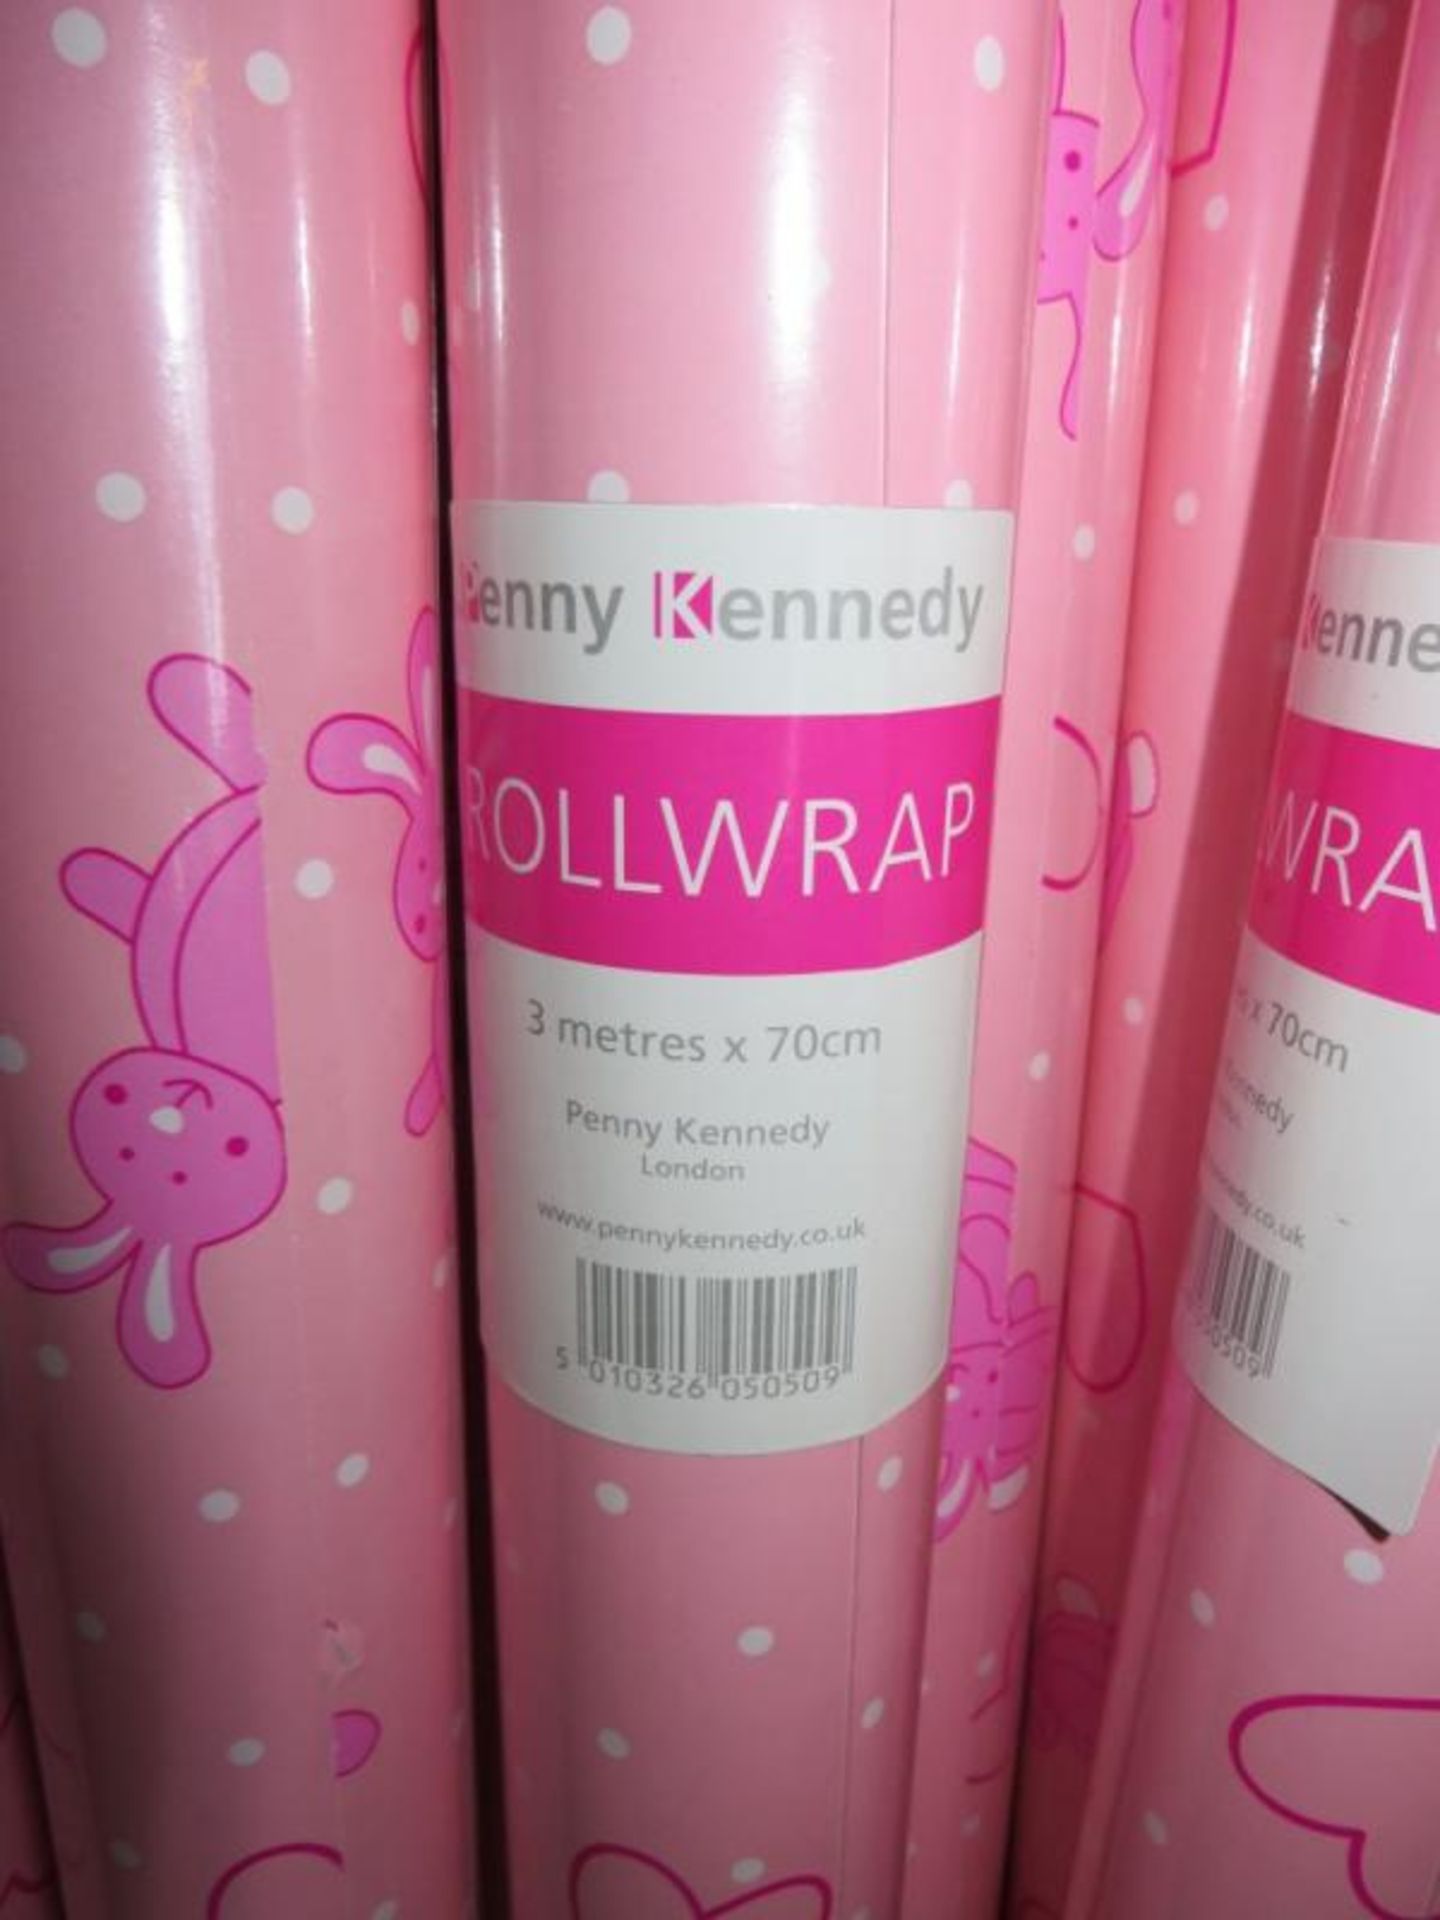 9 x Rolls of Bunny Wrap Wrapping Paper - CL185 - Ref: DRT0685 - Location: Stoke ST3 - Image 4 of 5